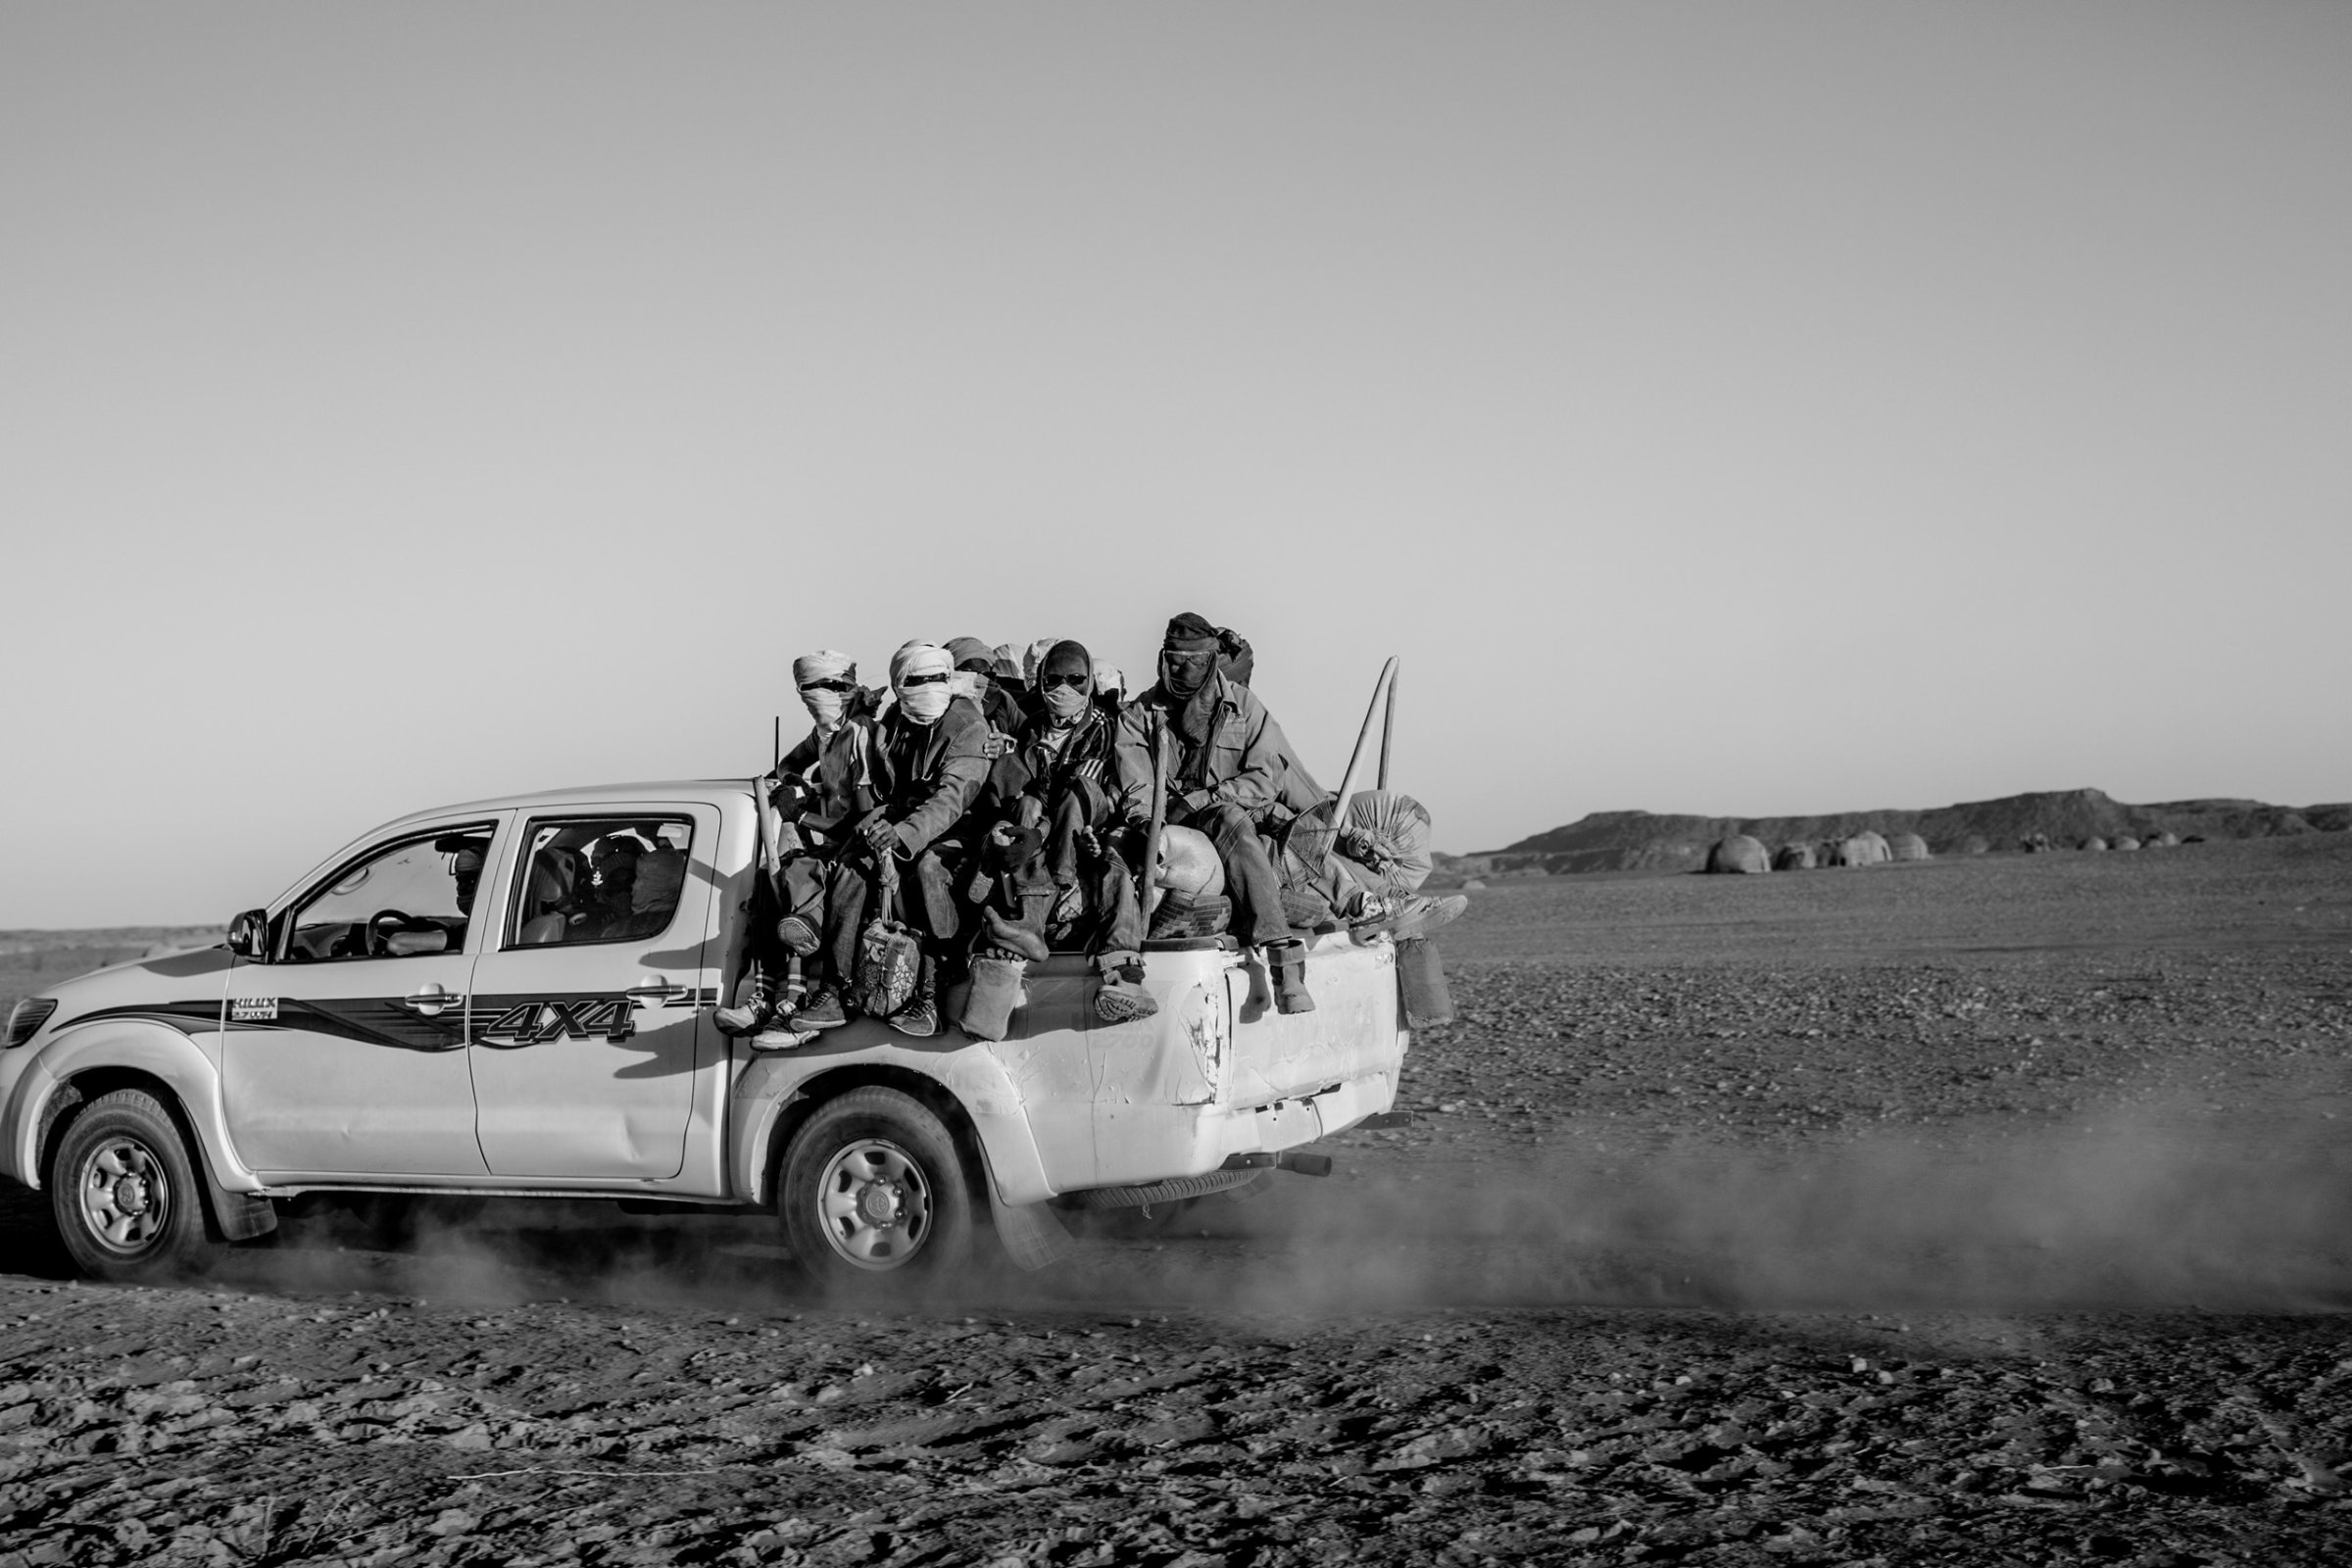 Migrants are stuffed into the back of a pickup truck as they begin the first day of their five day journey across the Sahara to Libya, in Niger on April 20, 2015.